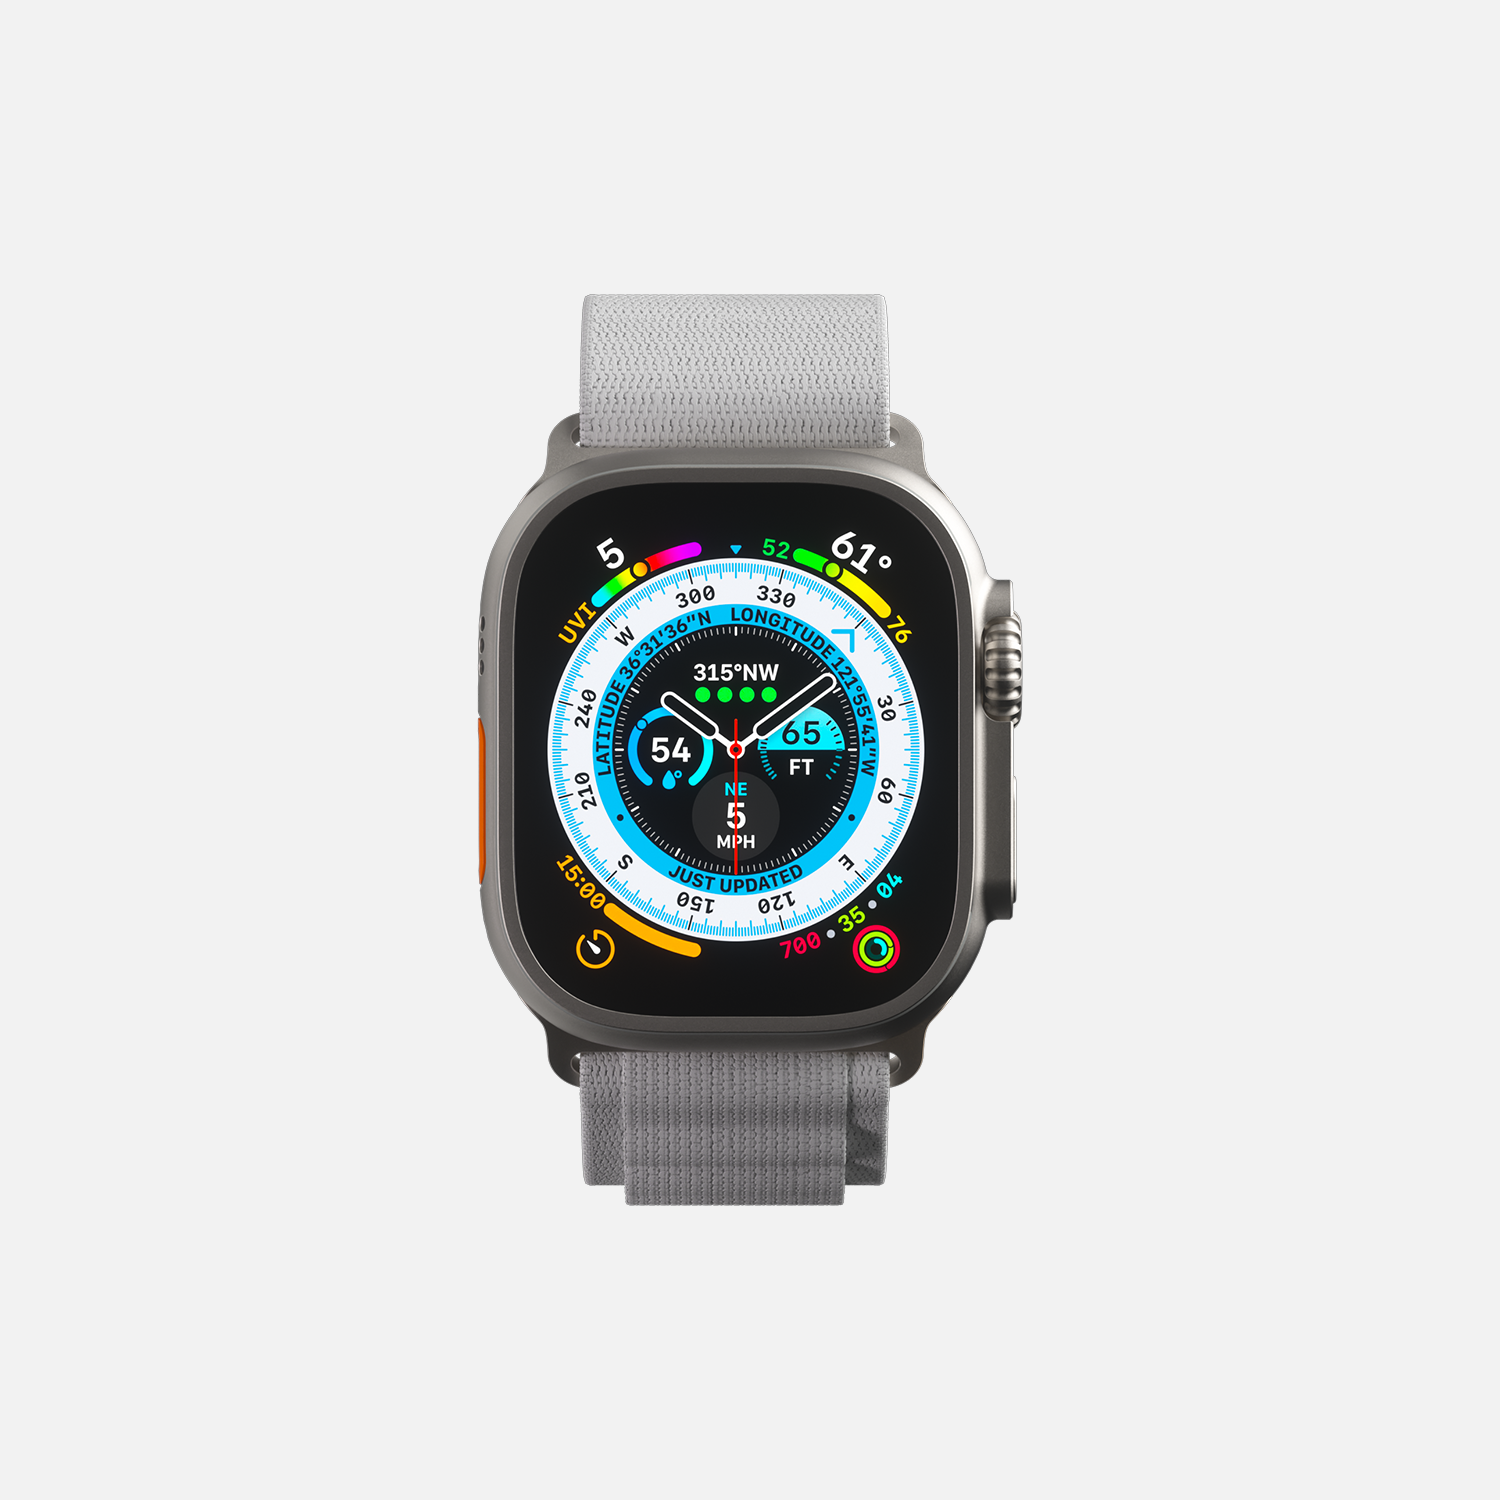 Smartwatch with colorful display featuring compass and weather functions on a gray strap."